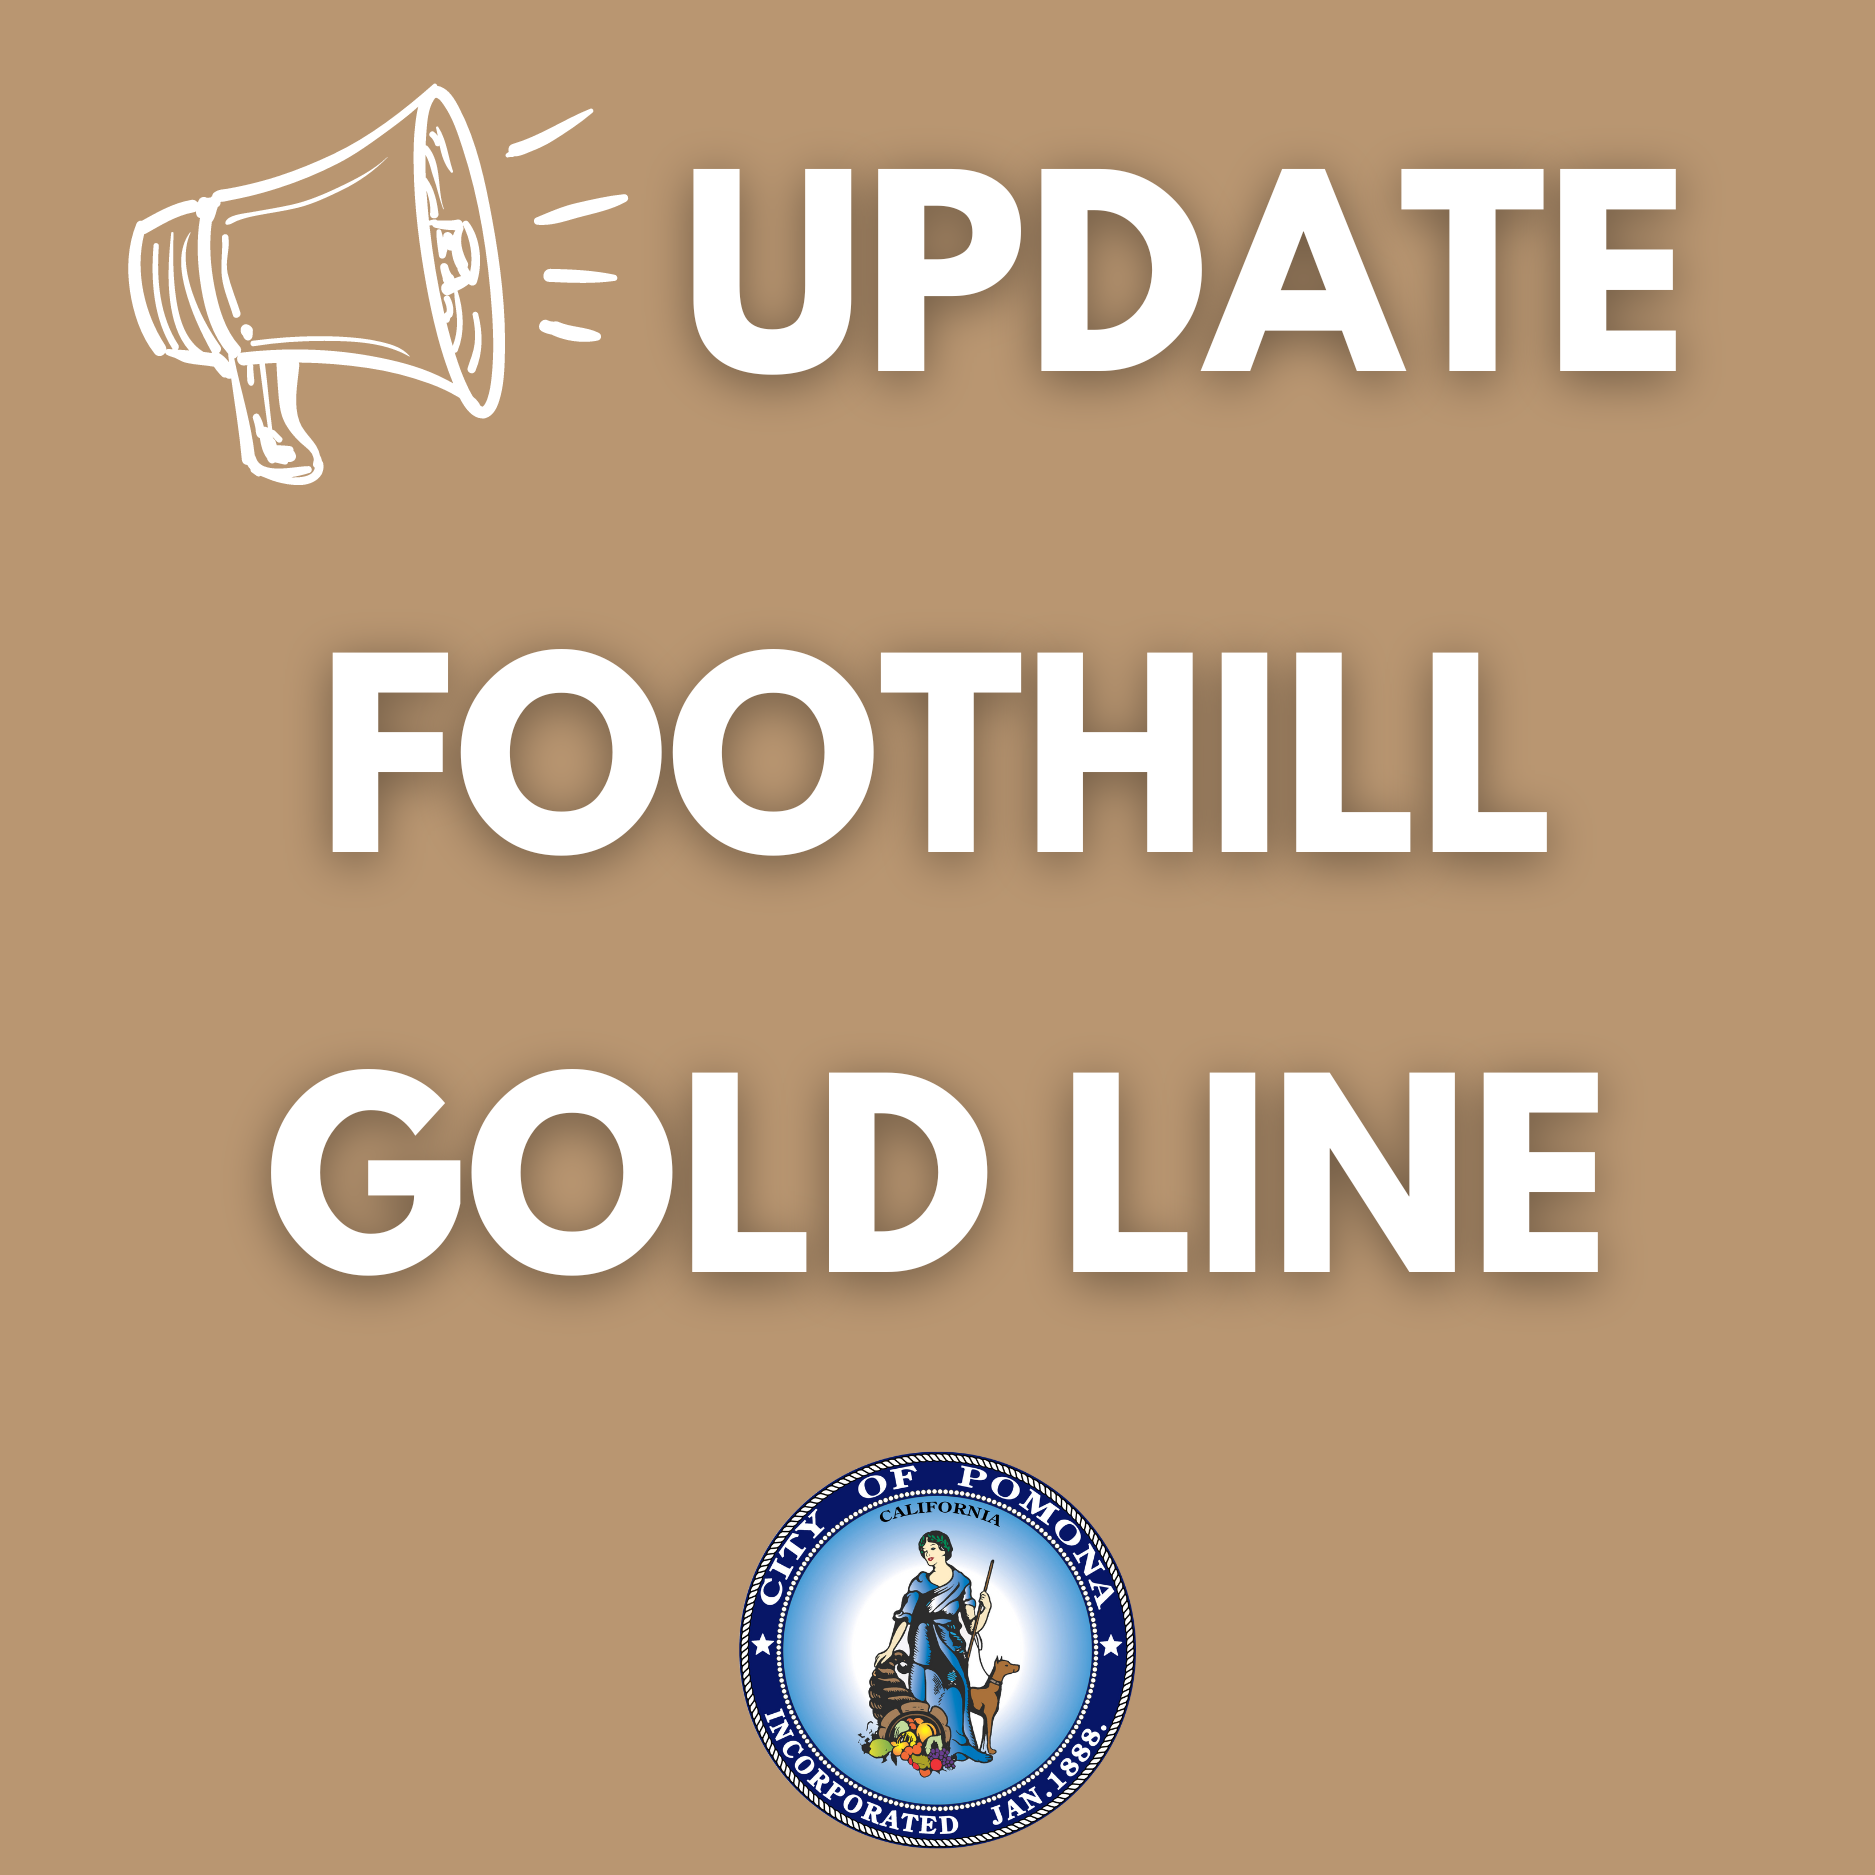 UPDATE: Foothill Gold Line